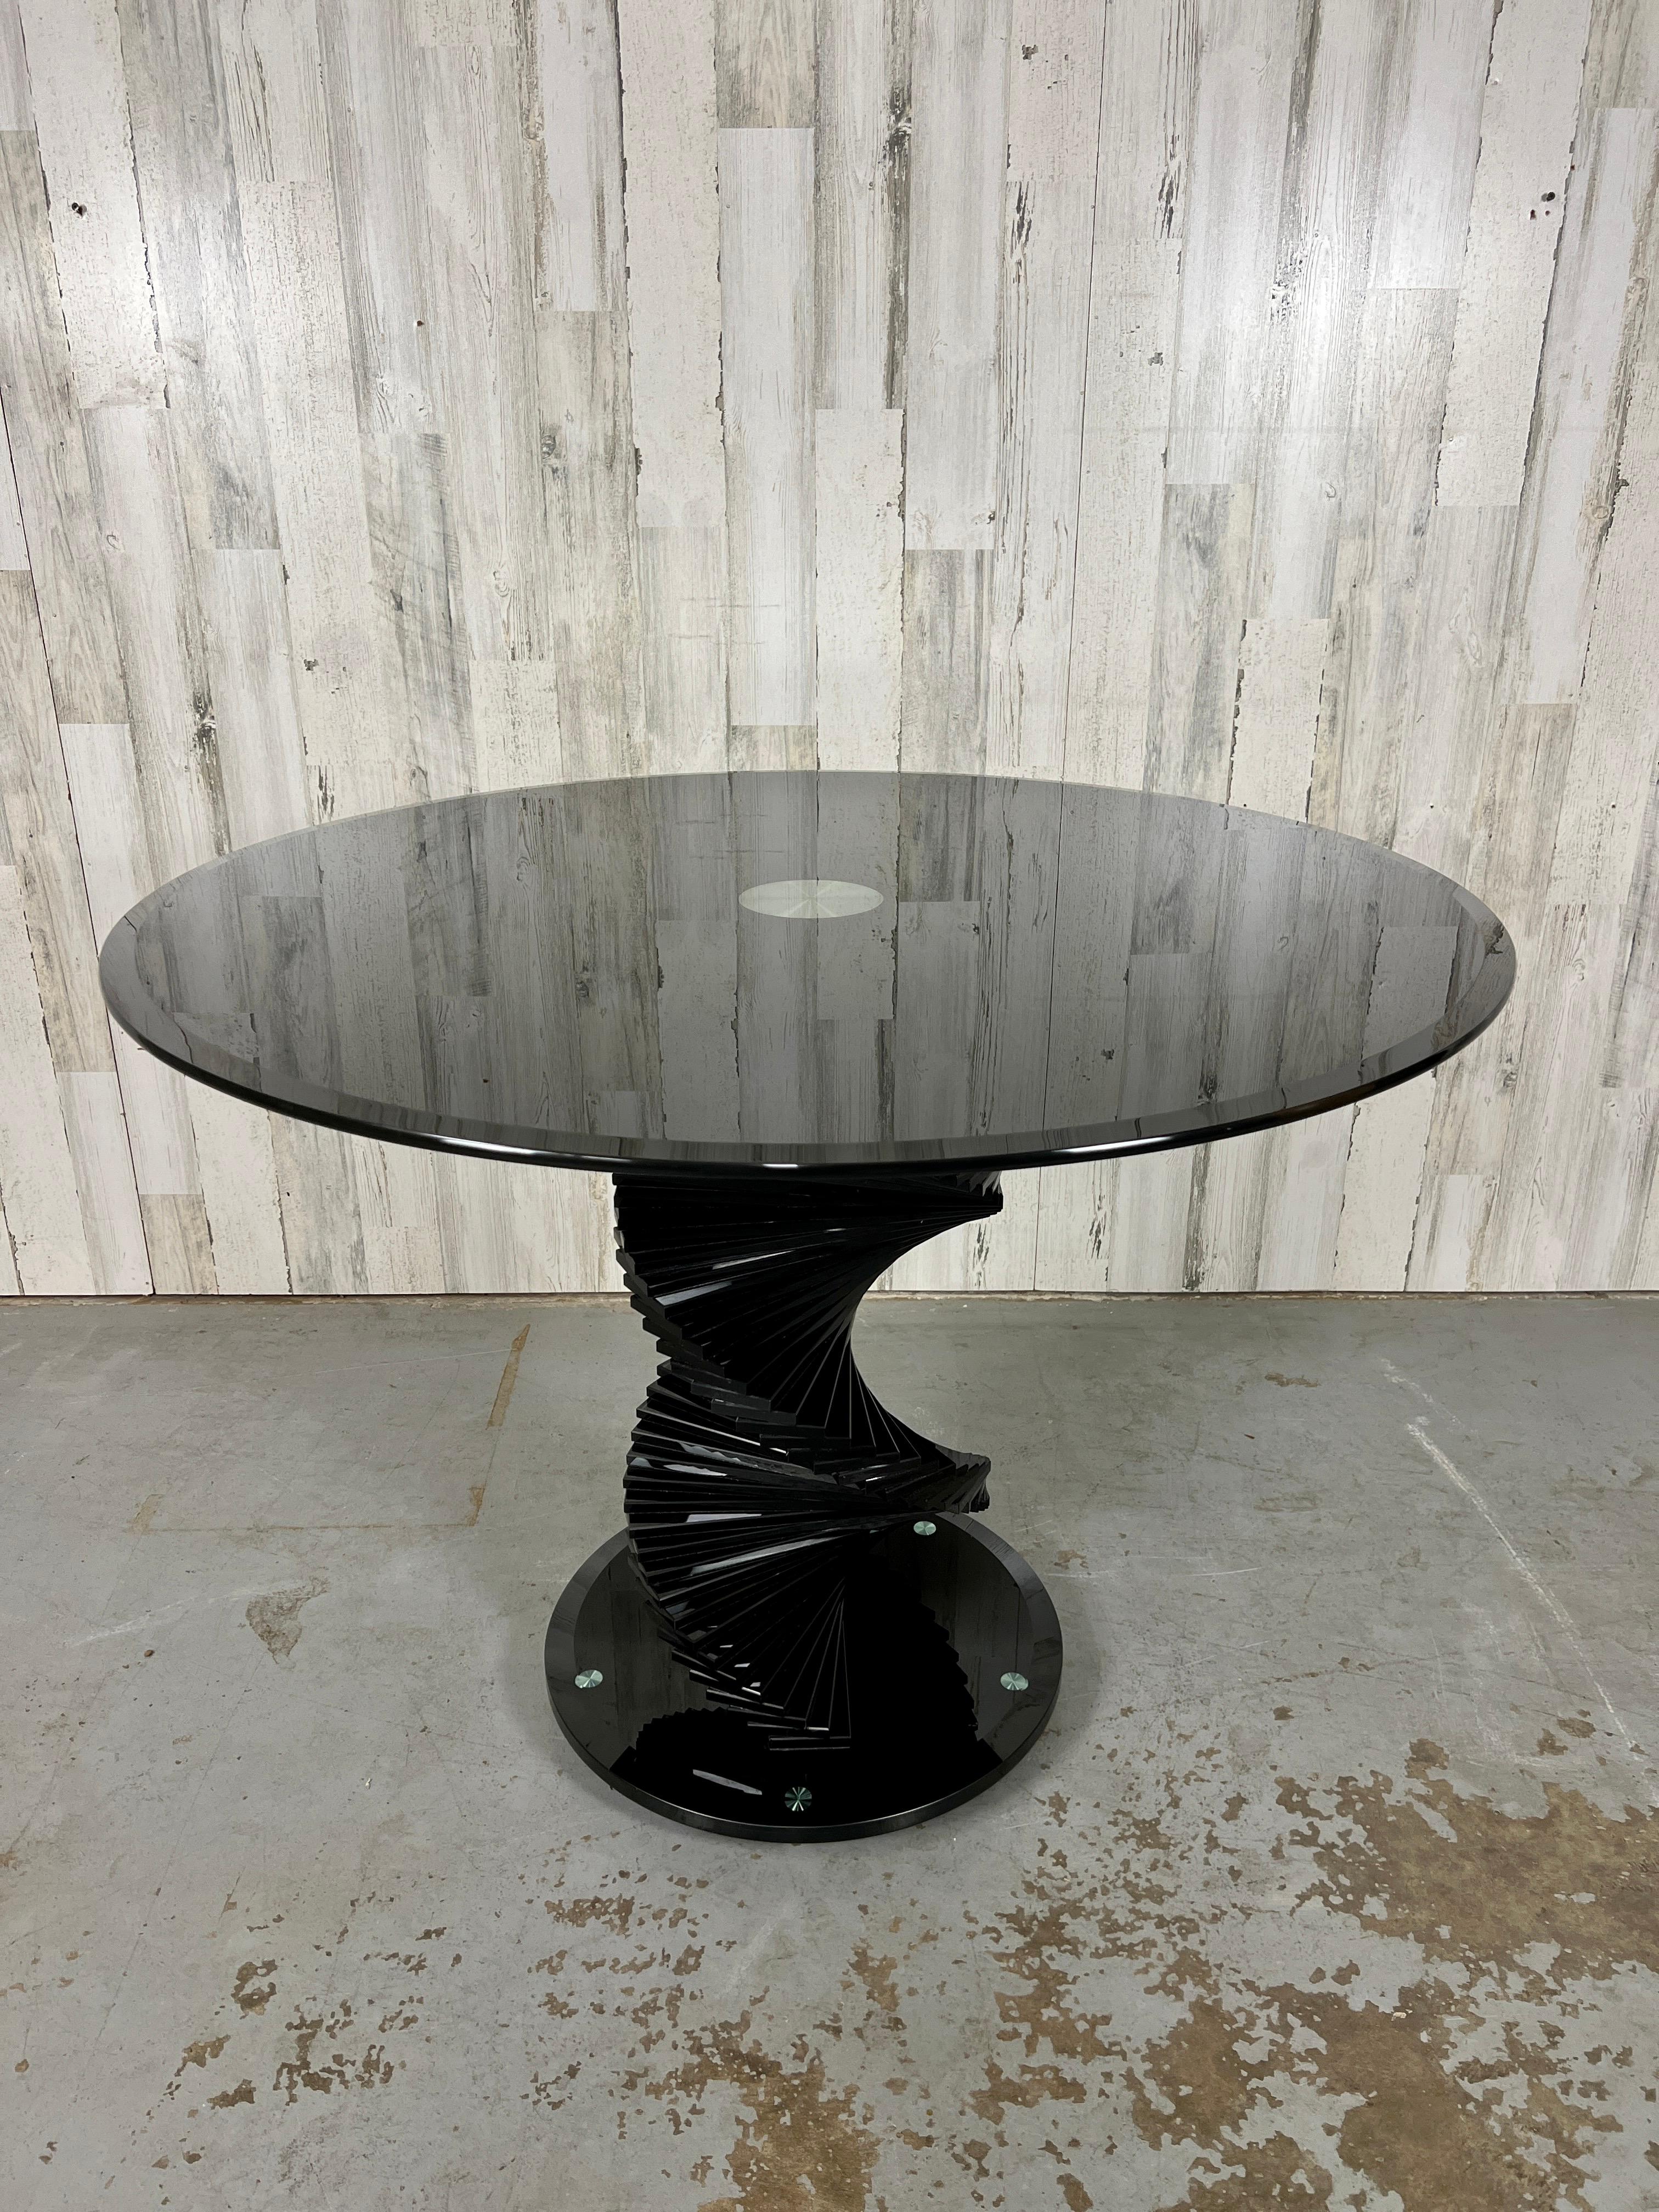 Smoked Glass Helix Spiral Dining Table / Game Table. Base Diameter 19.25 The top does remove for shipping.